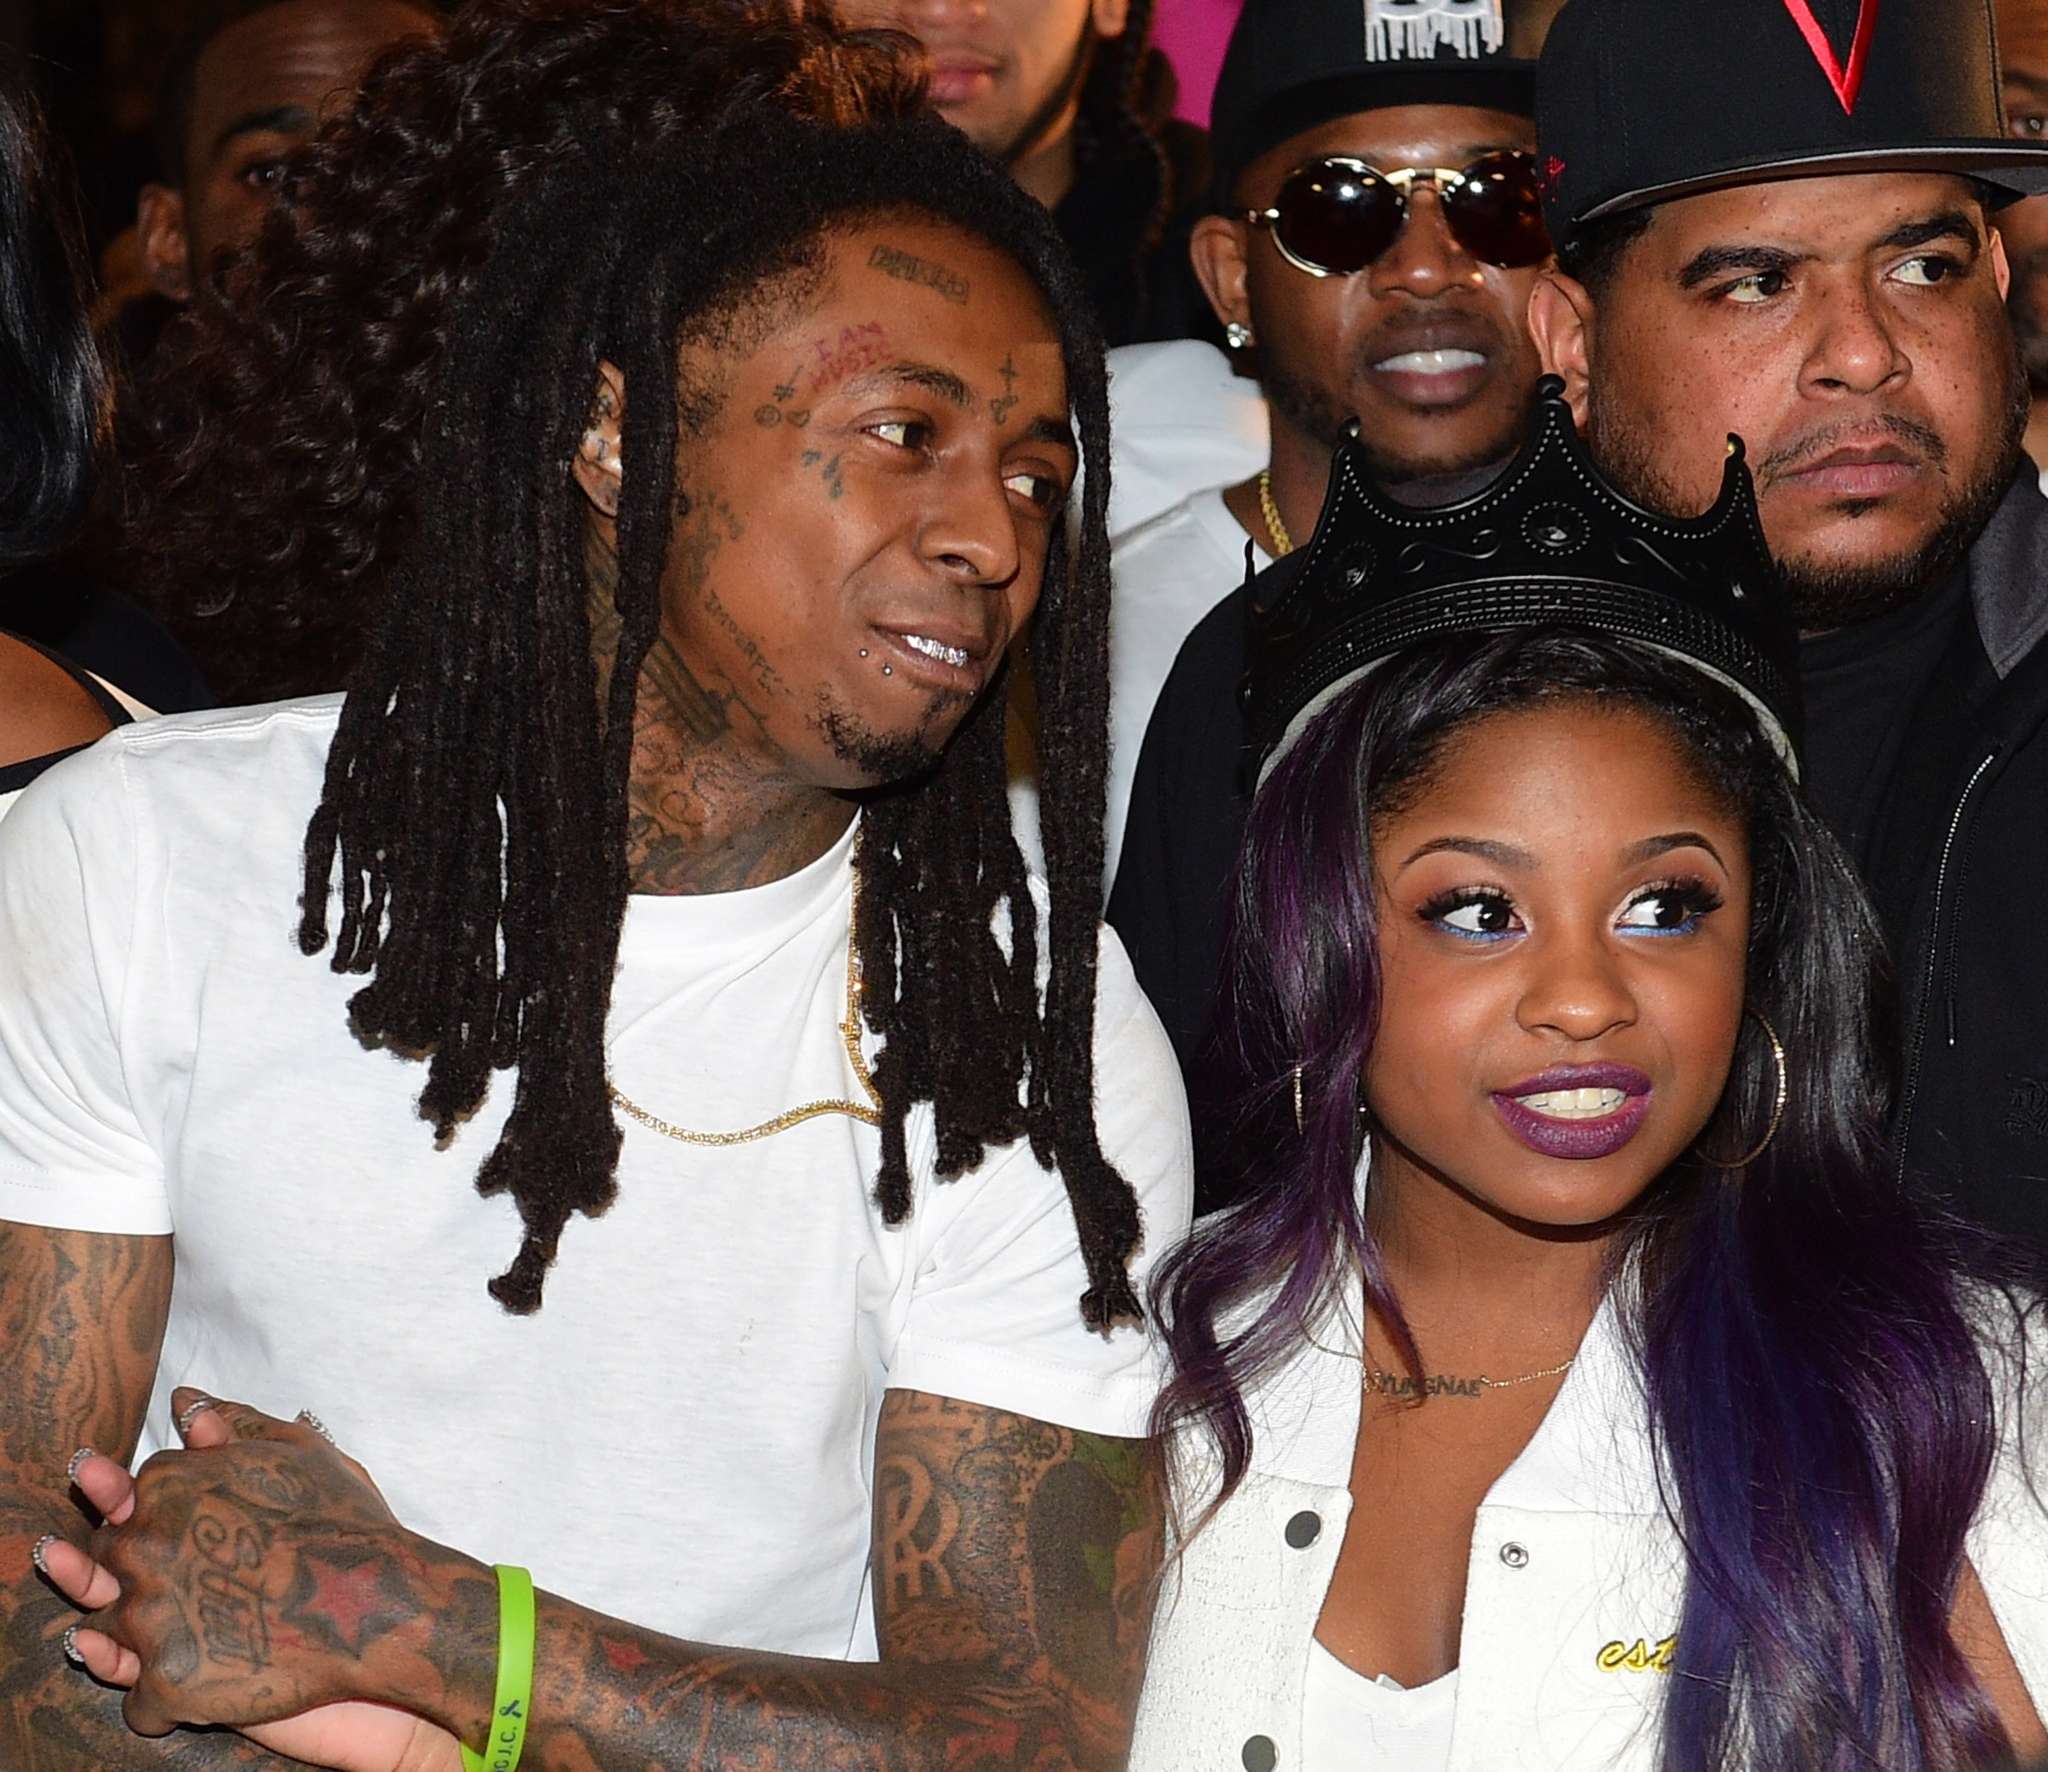 Reginae Carter's Photo With Her Dad, Lil Wayne Makes Fans Laugh